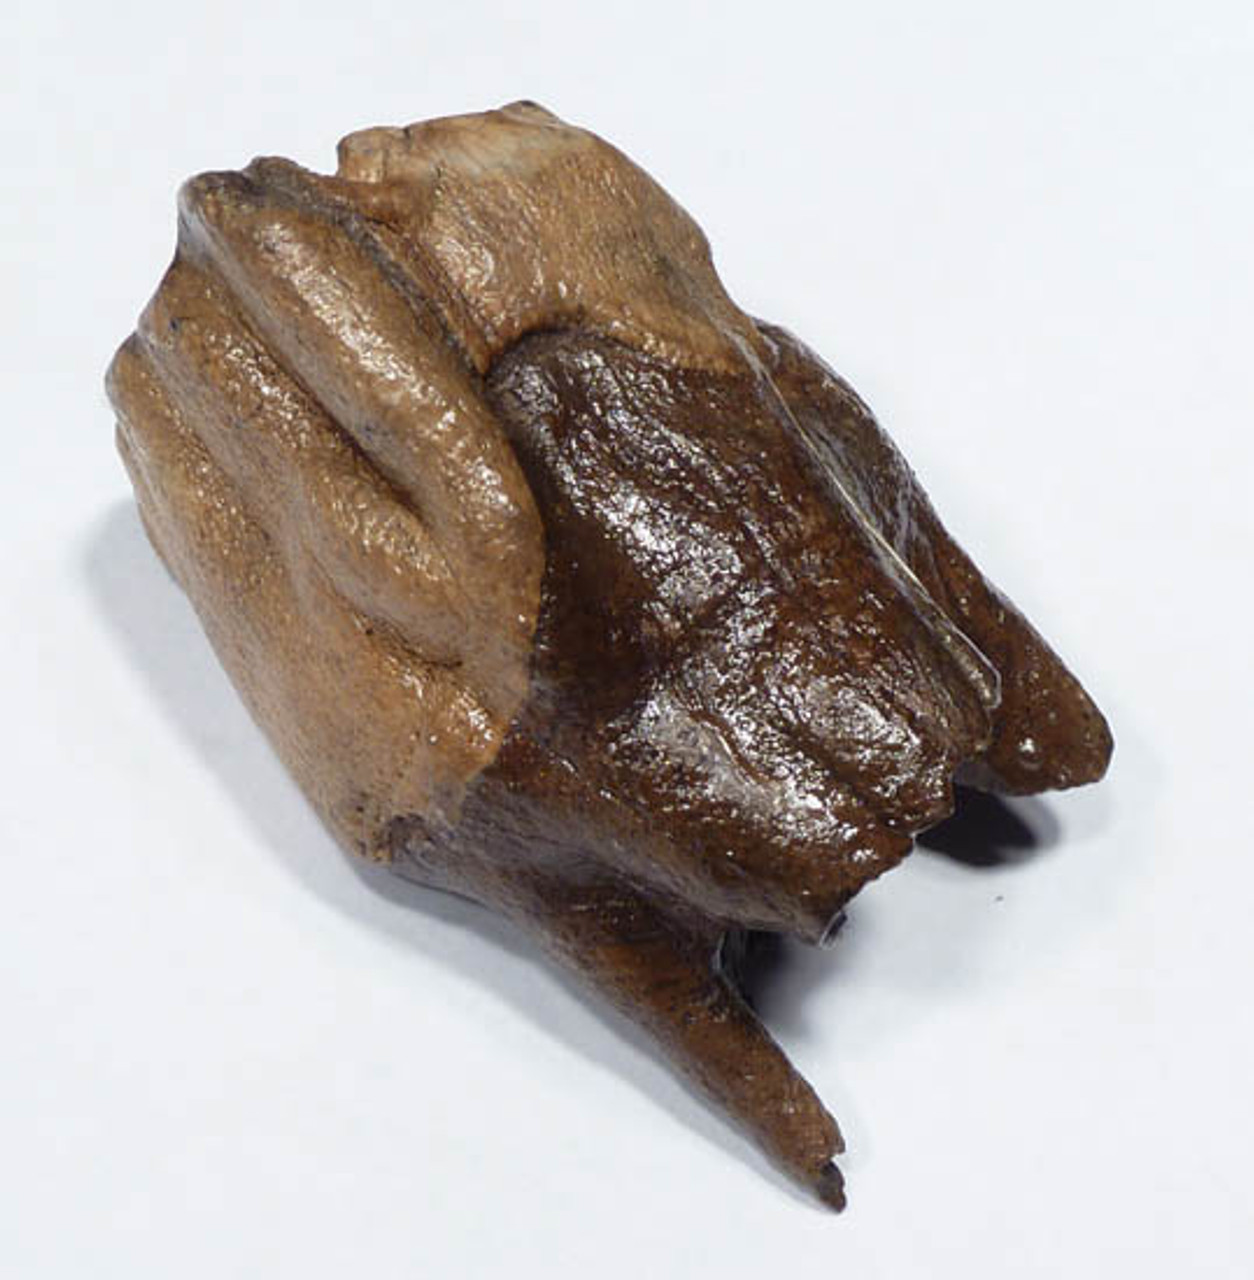 LM12-059  - FOSSIL GOLD AND BROWN  FINEST GRADE WOOLLY RHINOCEROS UPPER MOLAR TOOTH WITH INTACT ROOT